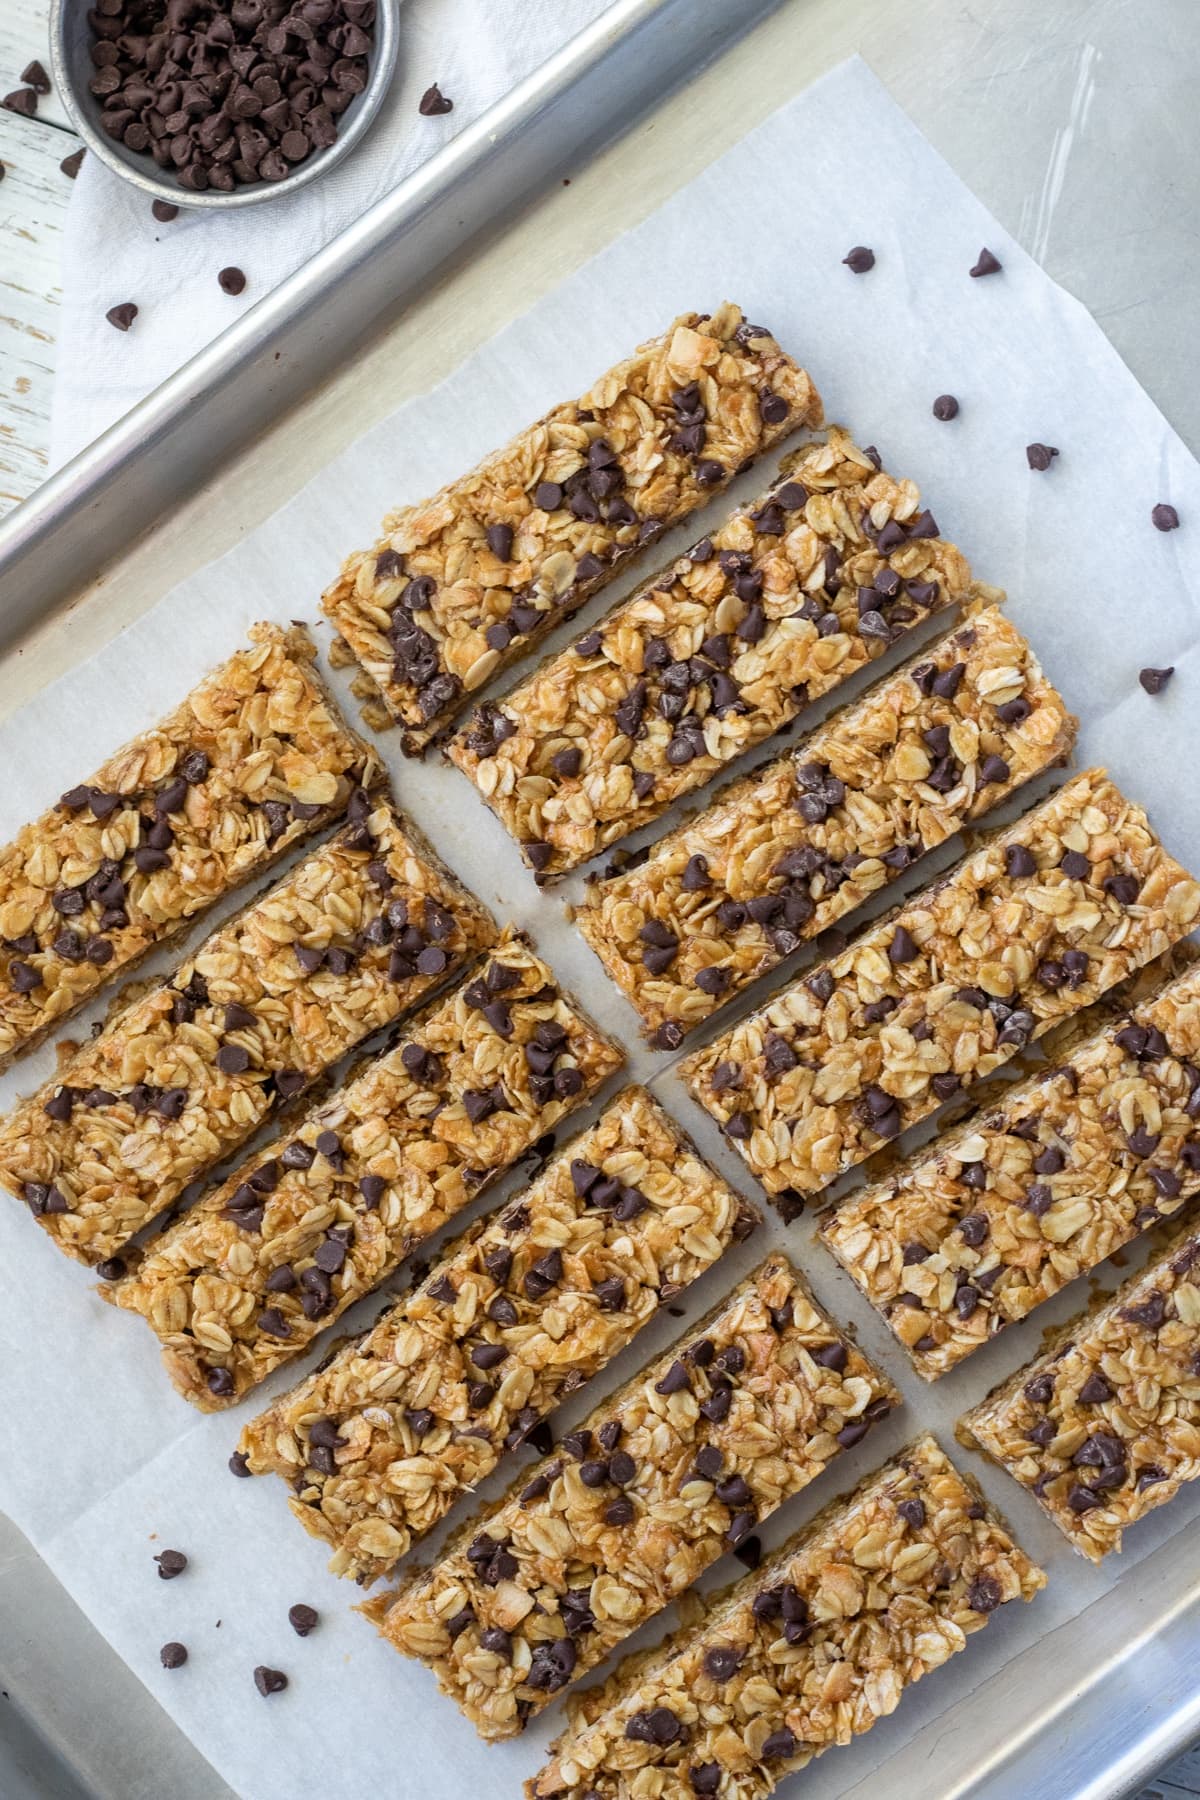 No bake peanut butter chocolate chip  oatmeal bars are made with old fashioned oats and toasted coconut with chocolate chips, honey and peanut butter to make a better version of chewy granola bars. 